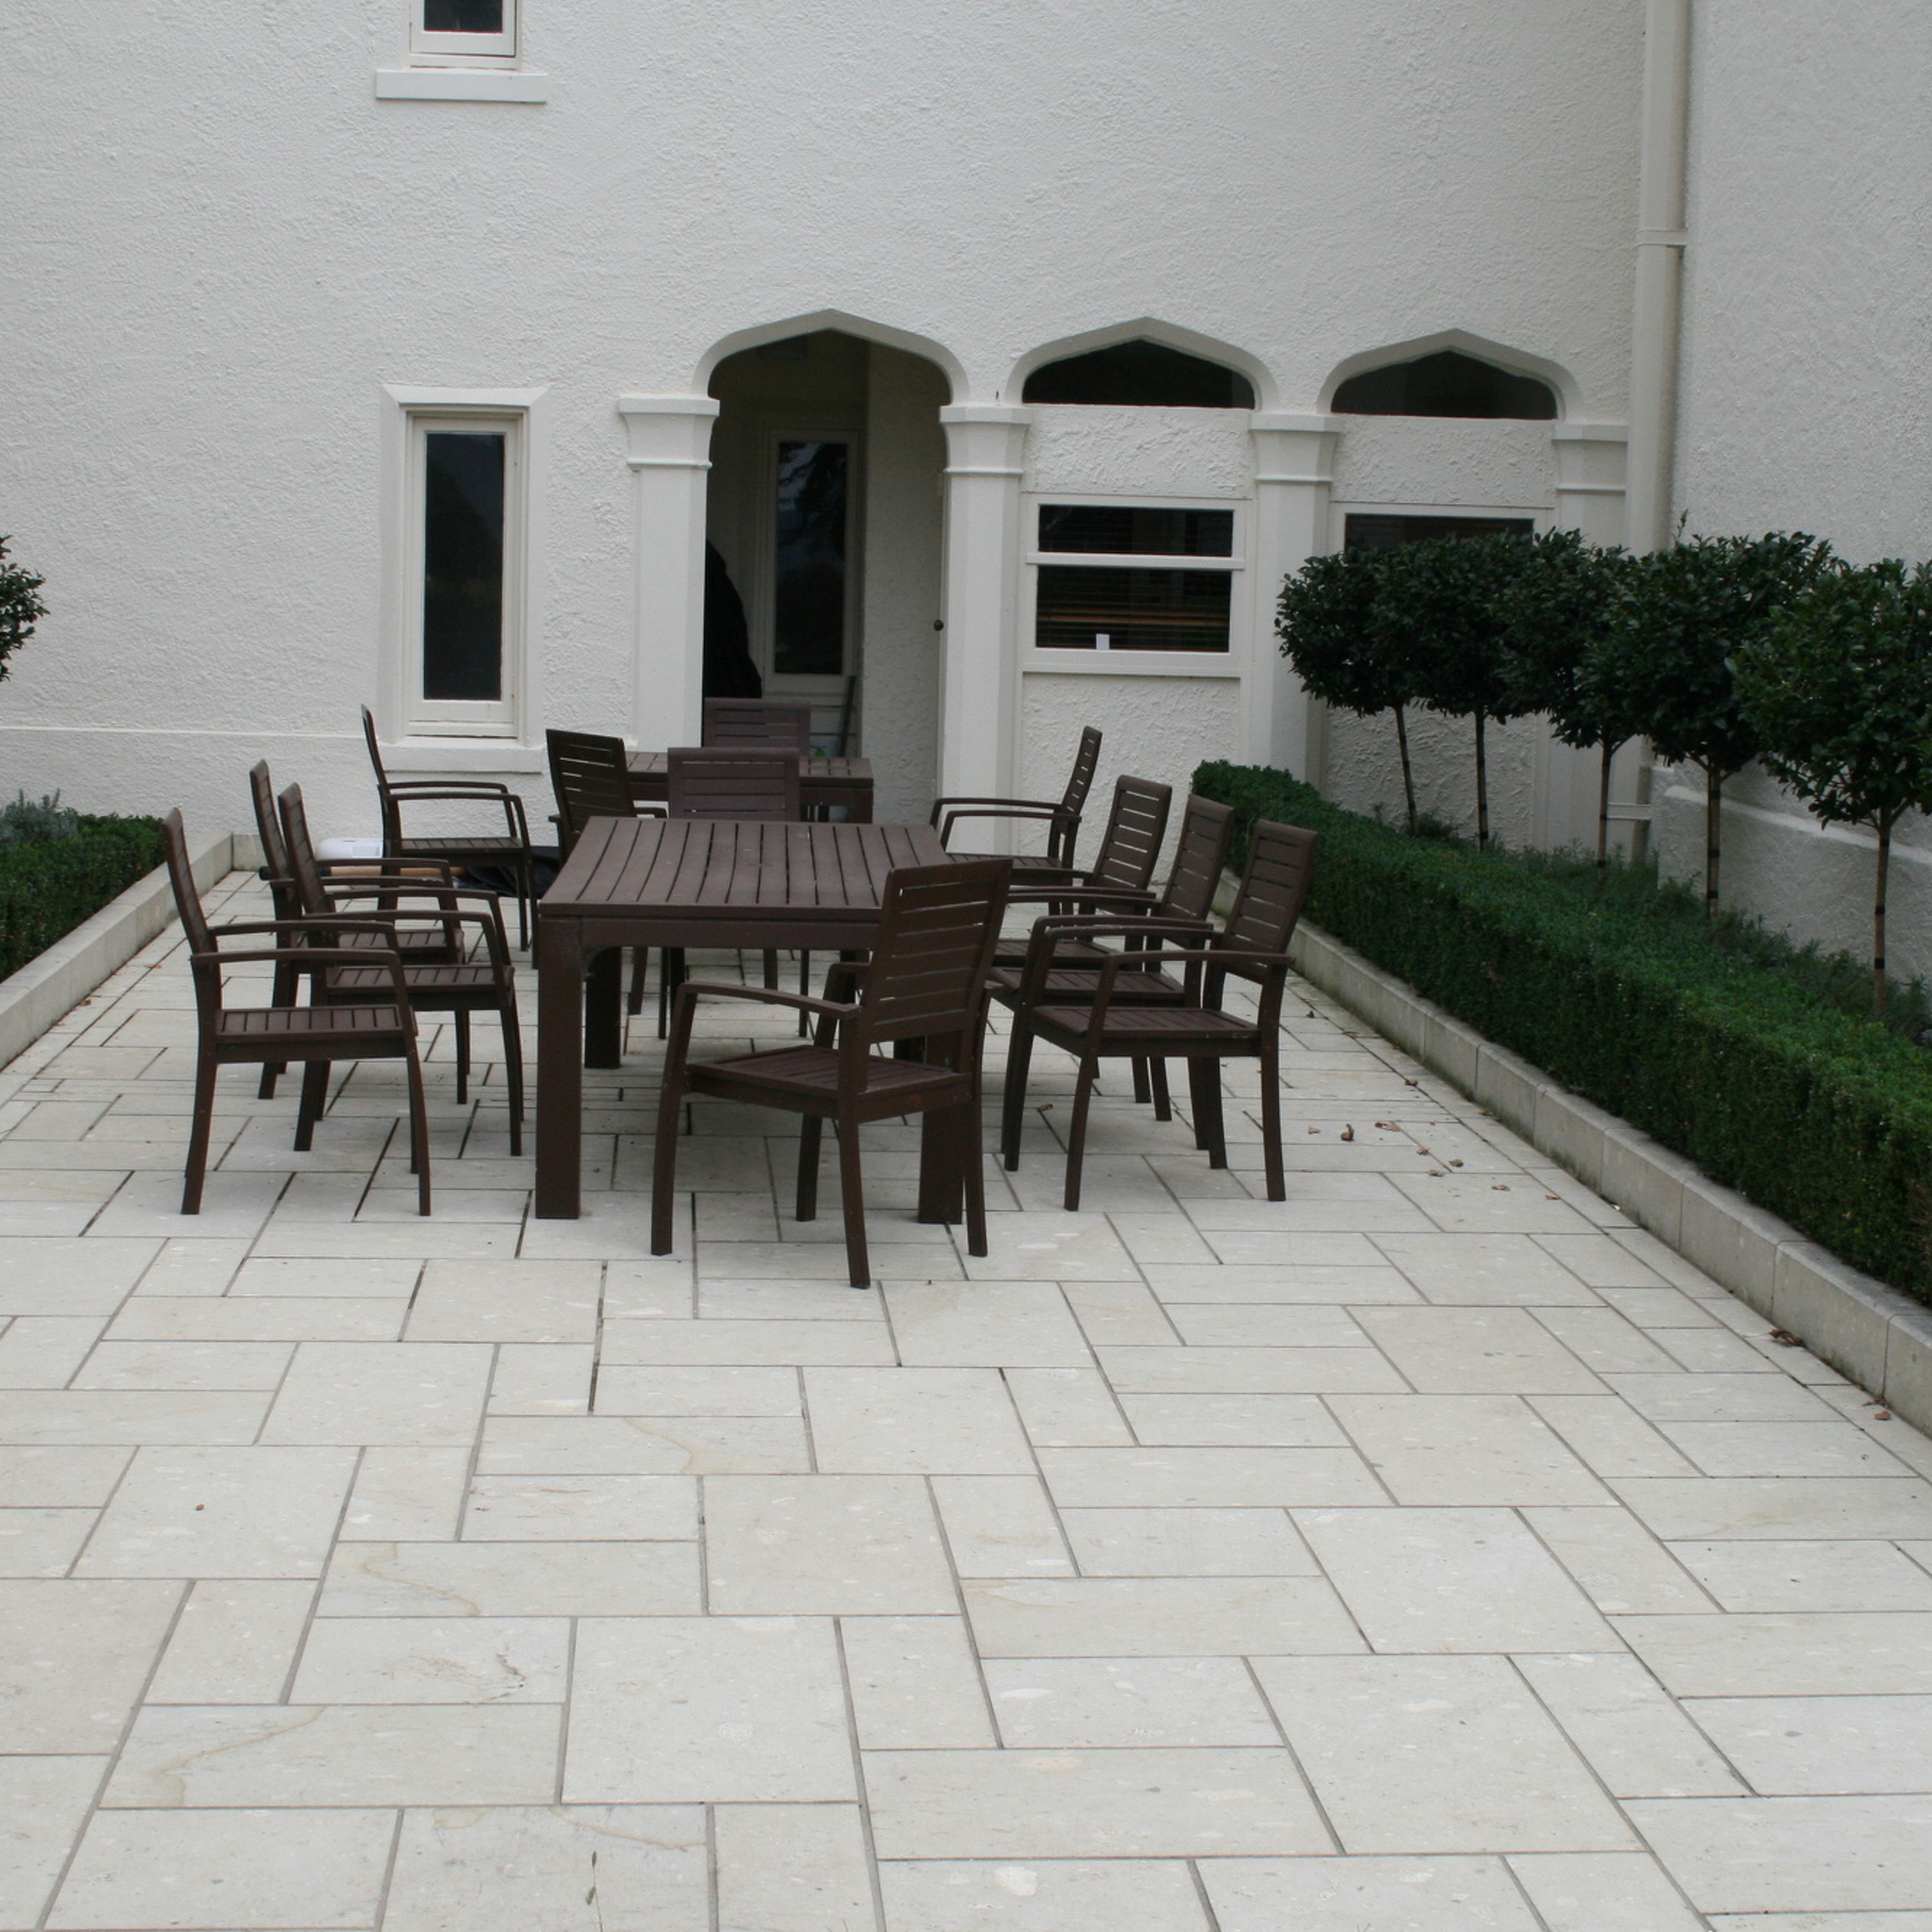 Paving and Landscaping